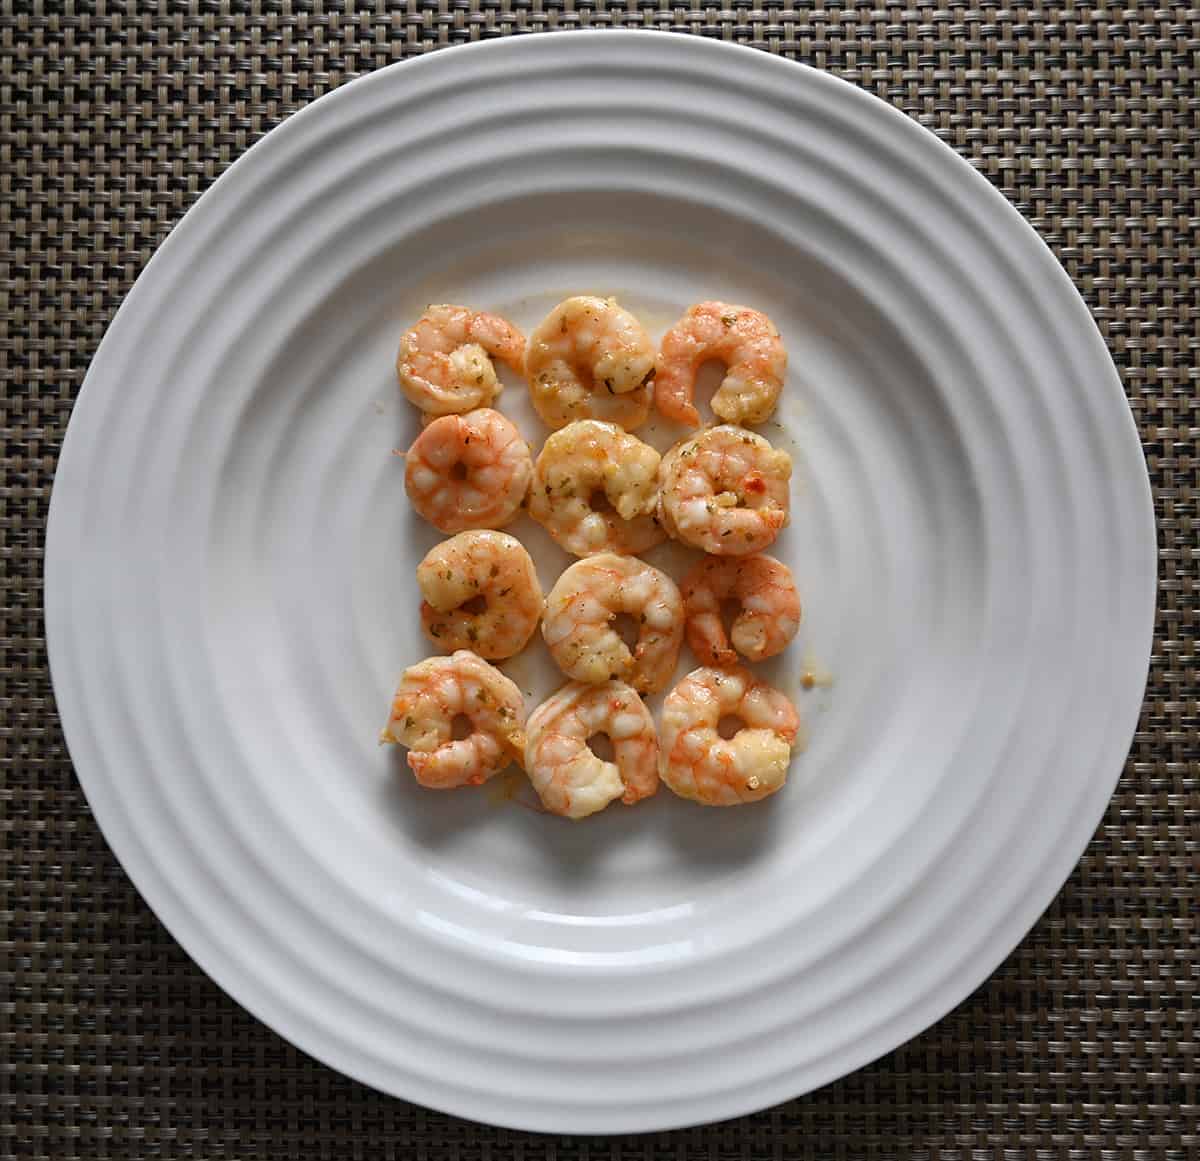 Top down image of 12 garlic butter shrimp served on a white plate.